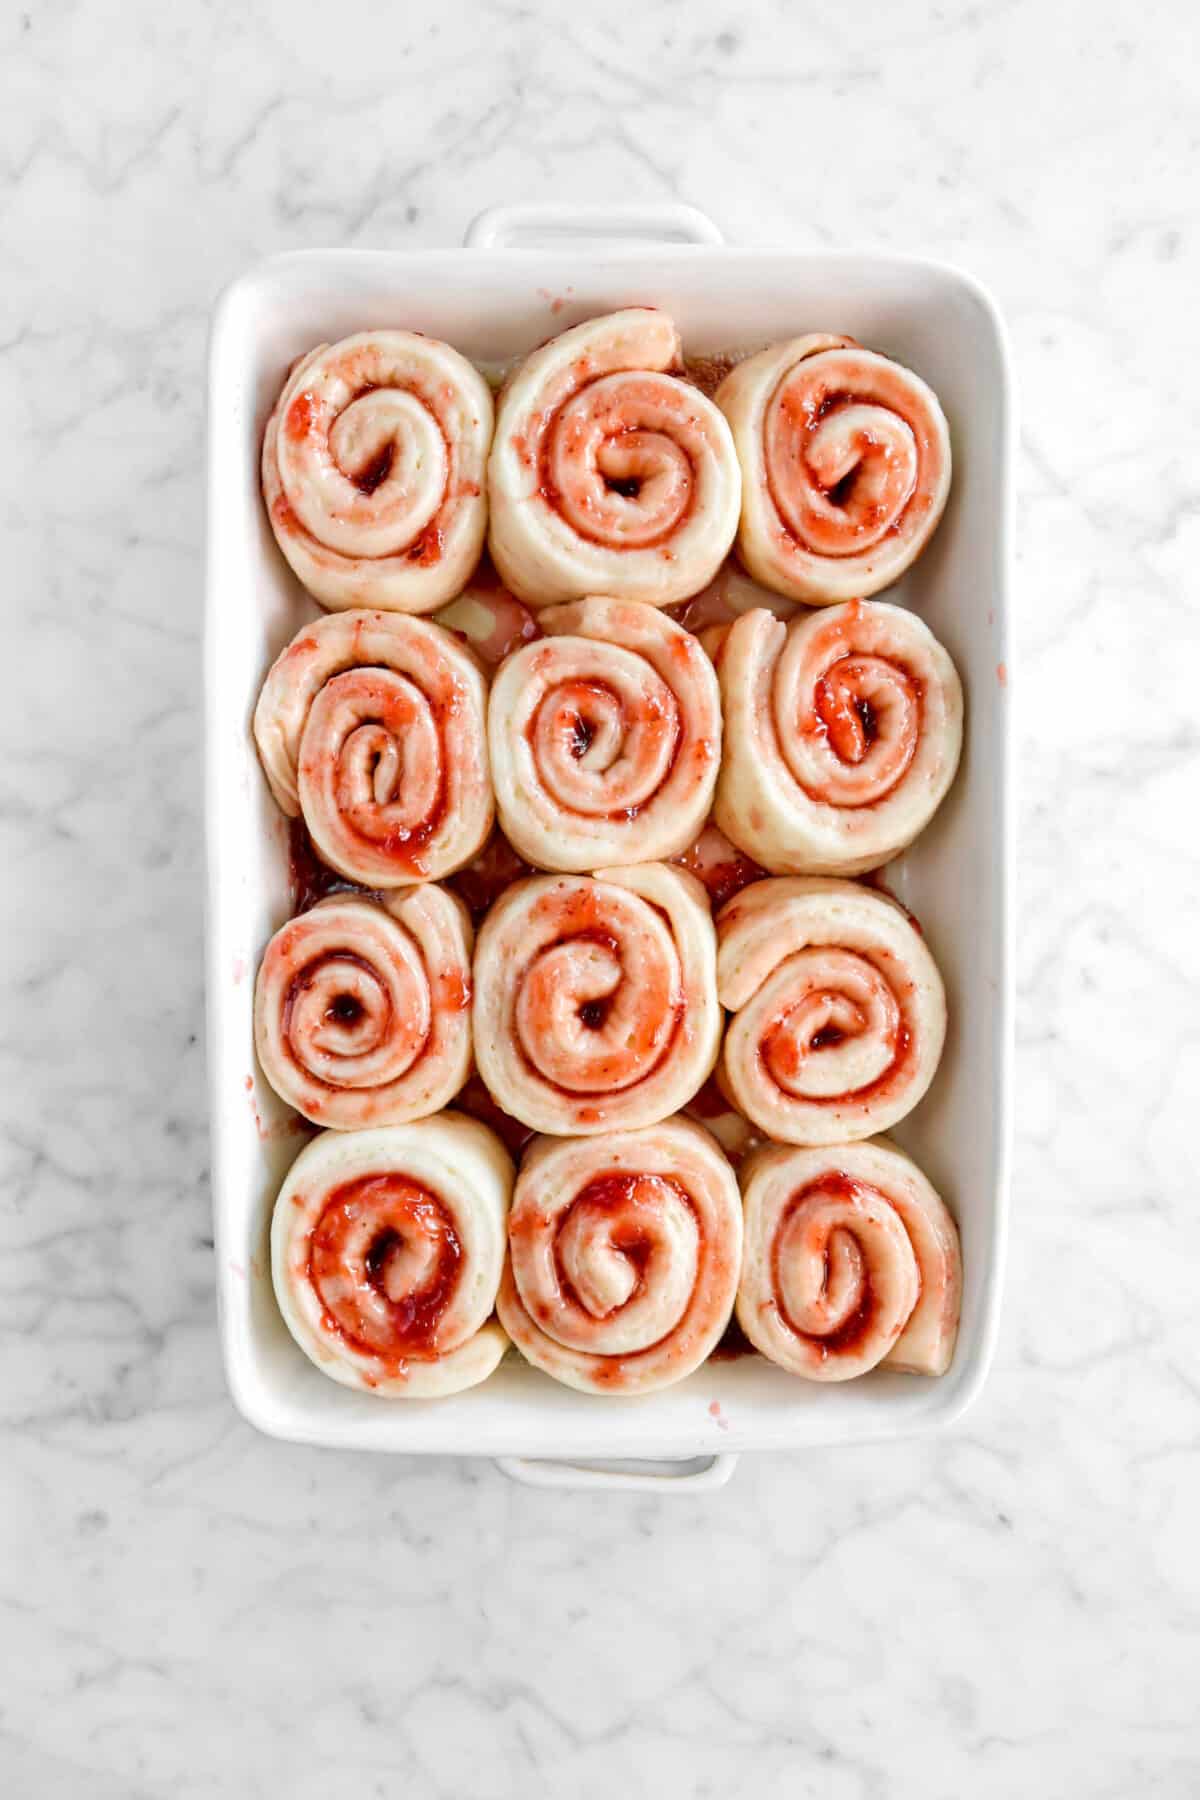 strawberry rolls doubled in size in rectangular pan